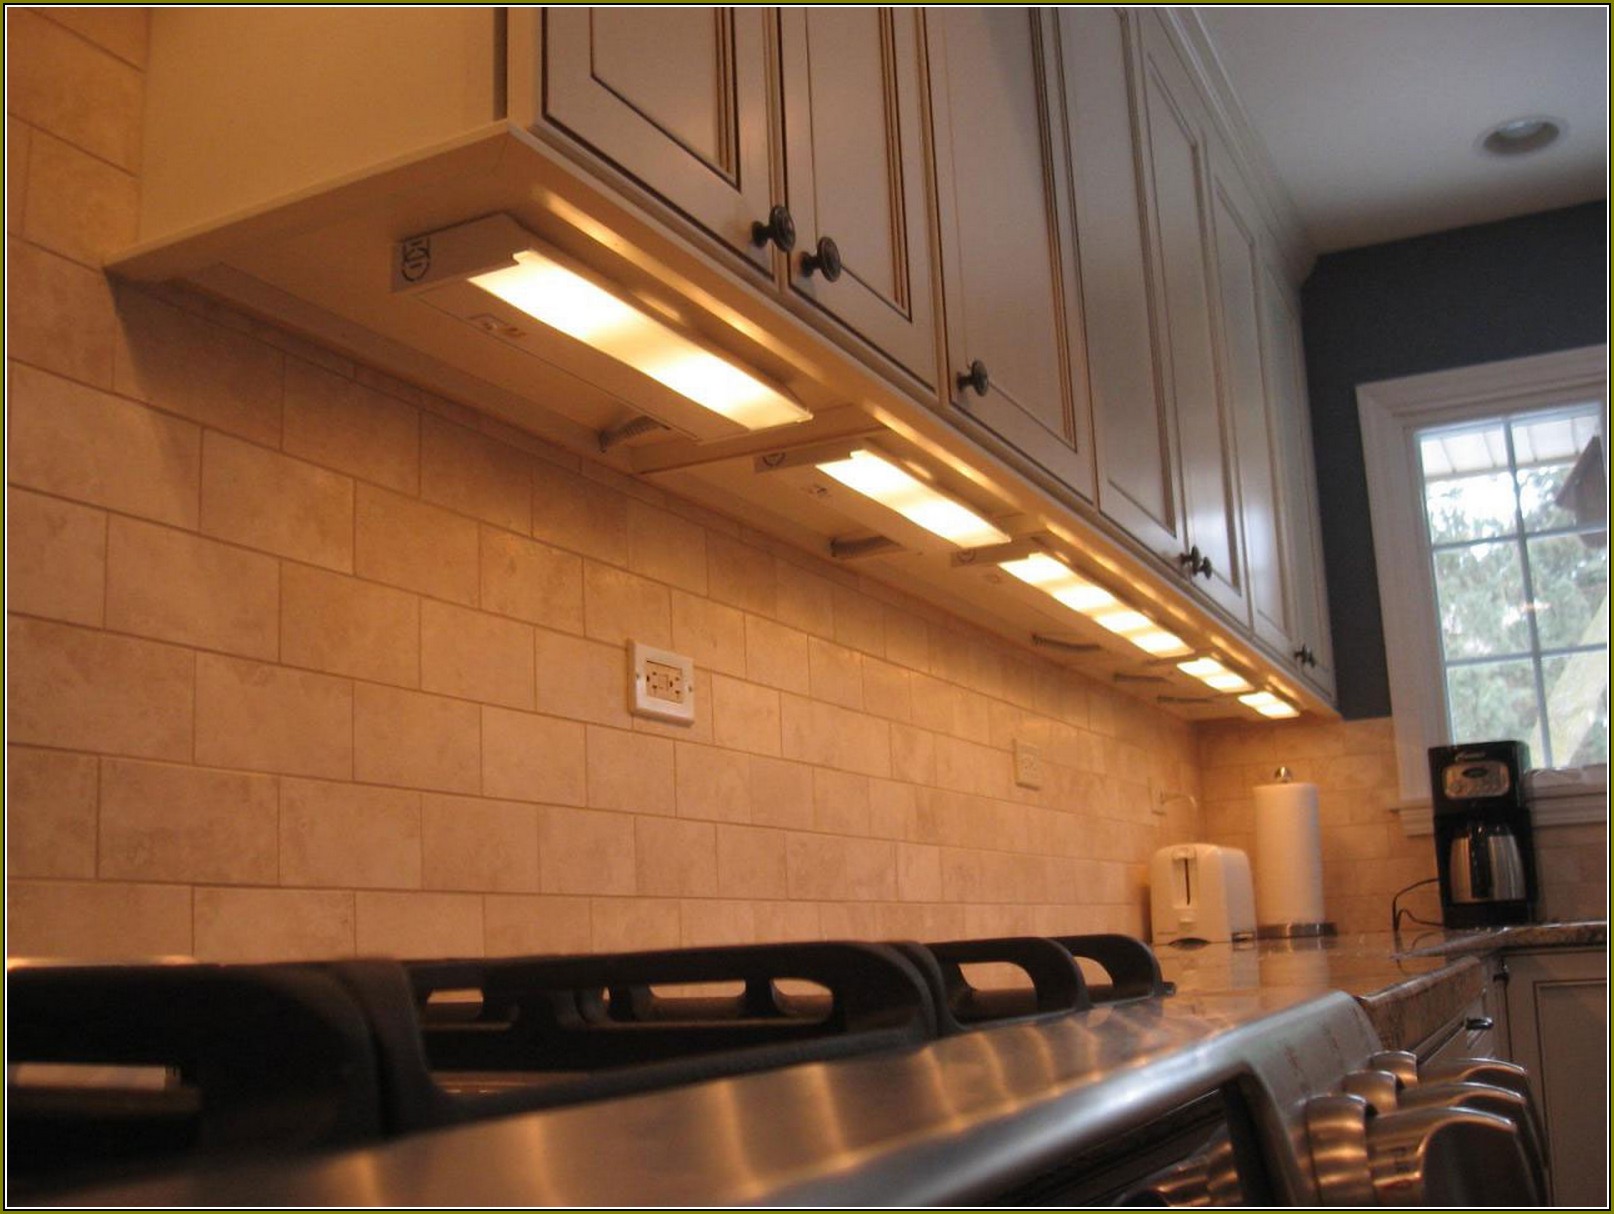 what is important for choosing led cabinet light?